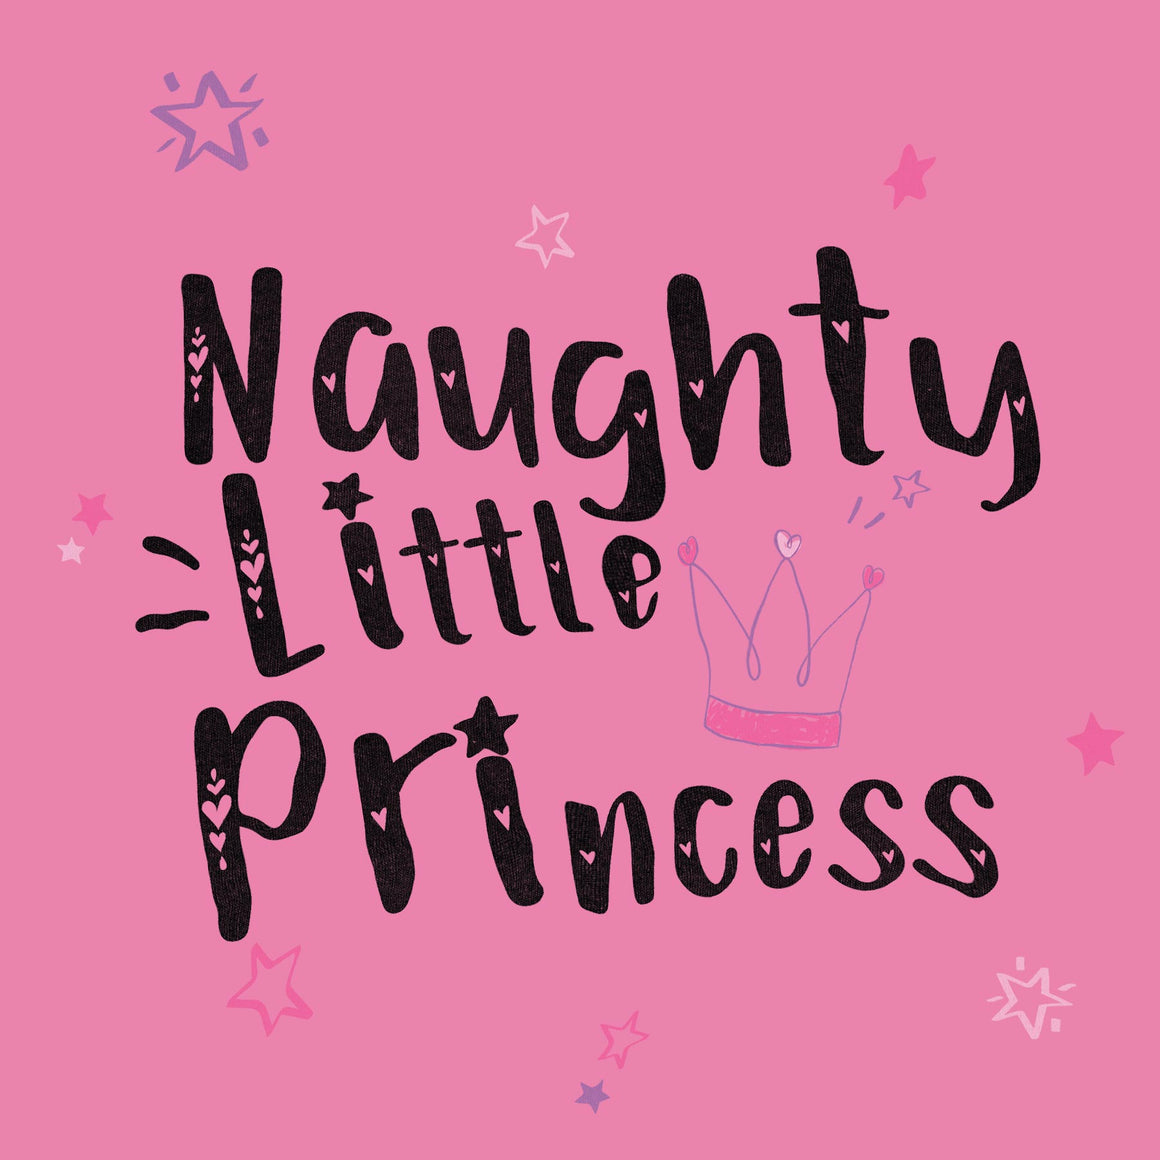 Naughty Little Princess - Youth Fleece Hoodie - Candy Pink - http://thenaughtylist.com